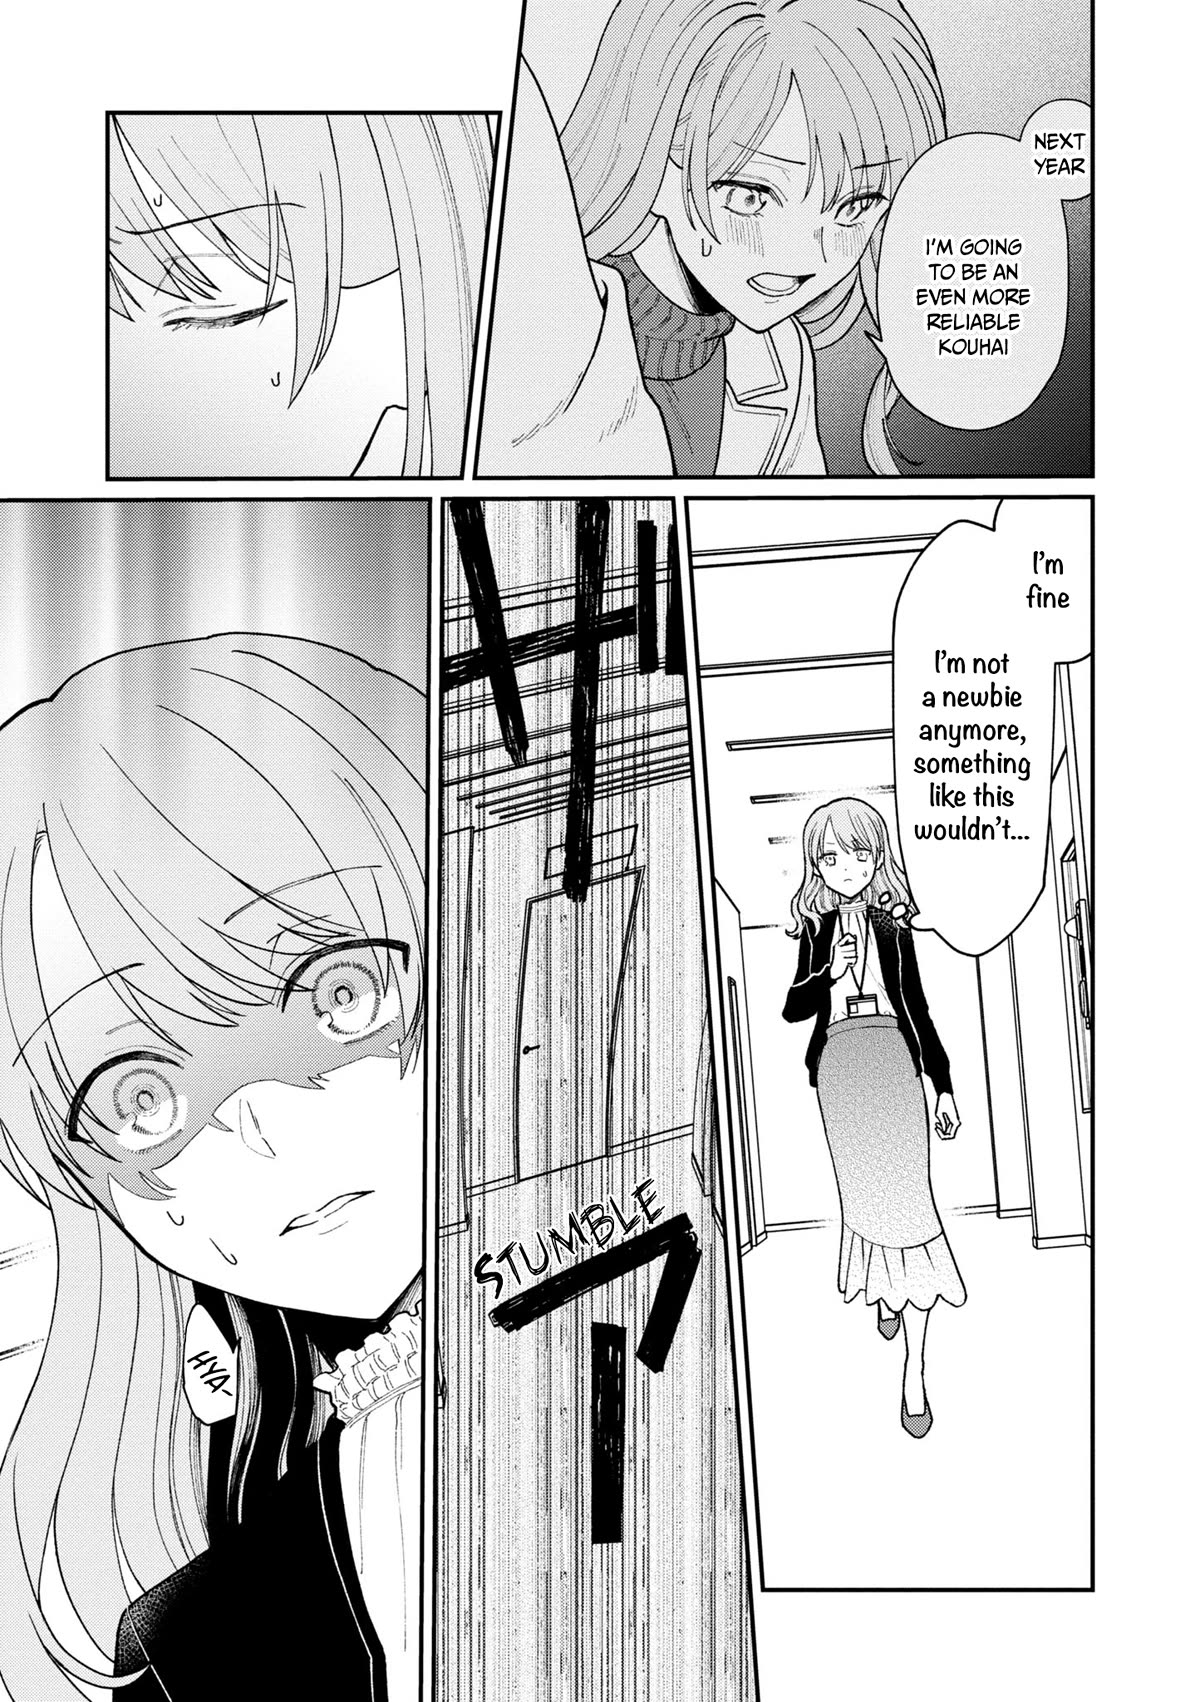 The New-Hire Who Could "Read" Emotions and the Unsociable Senpai - chapter 27 - #4